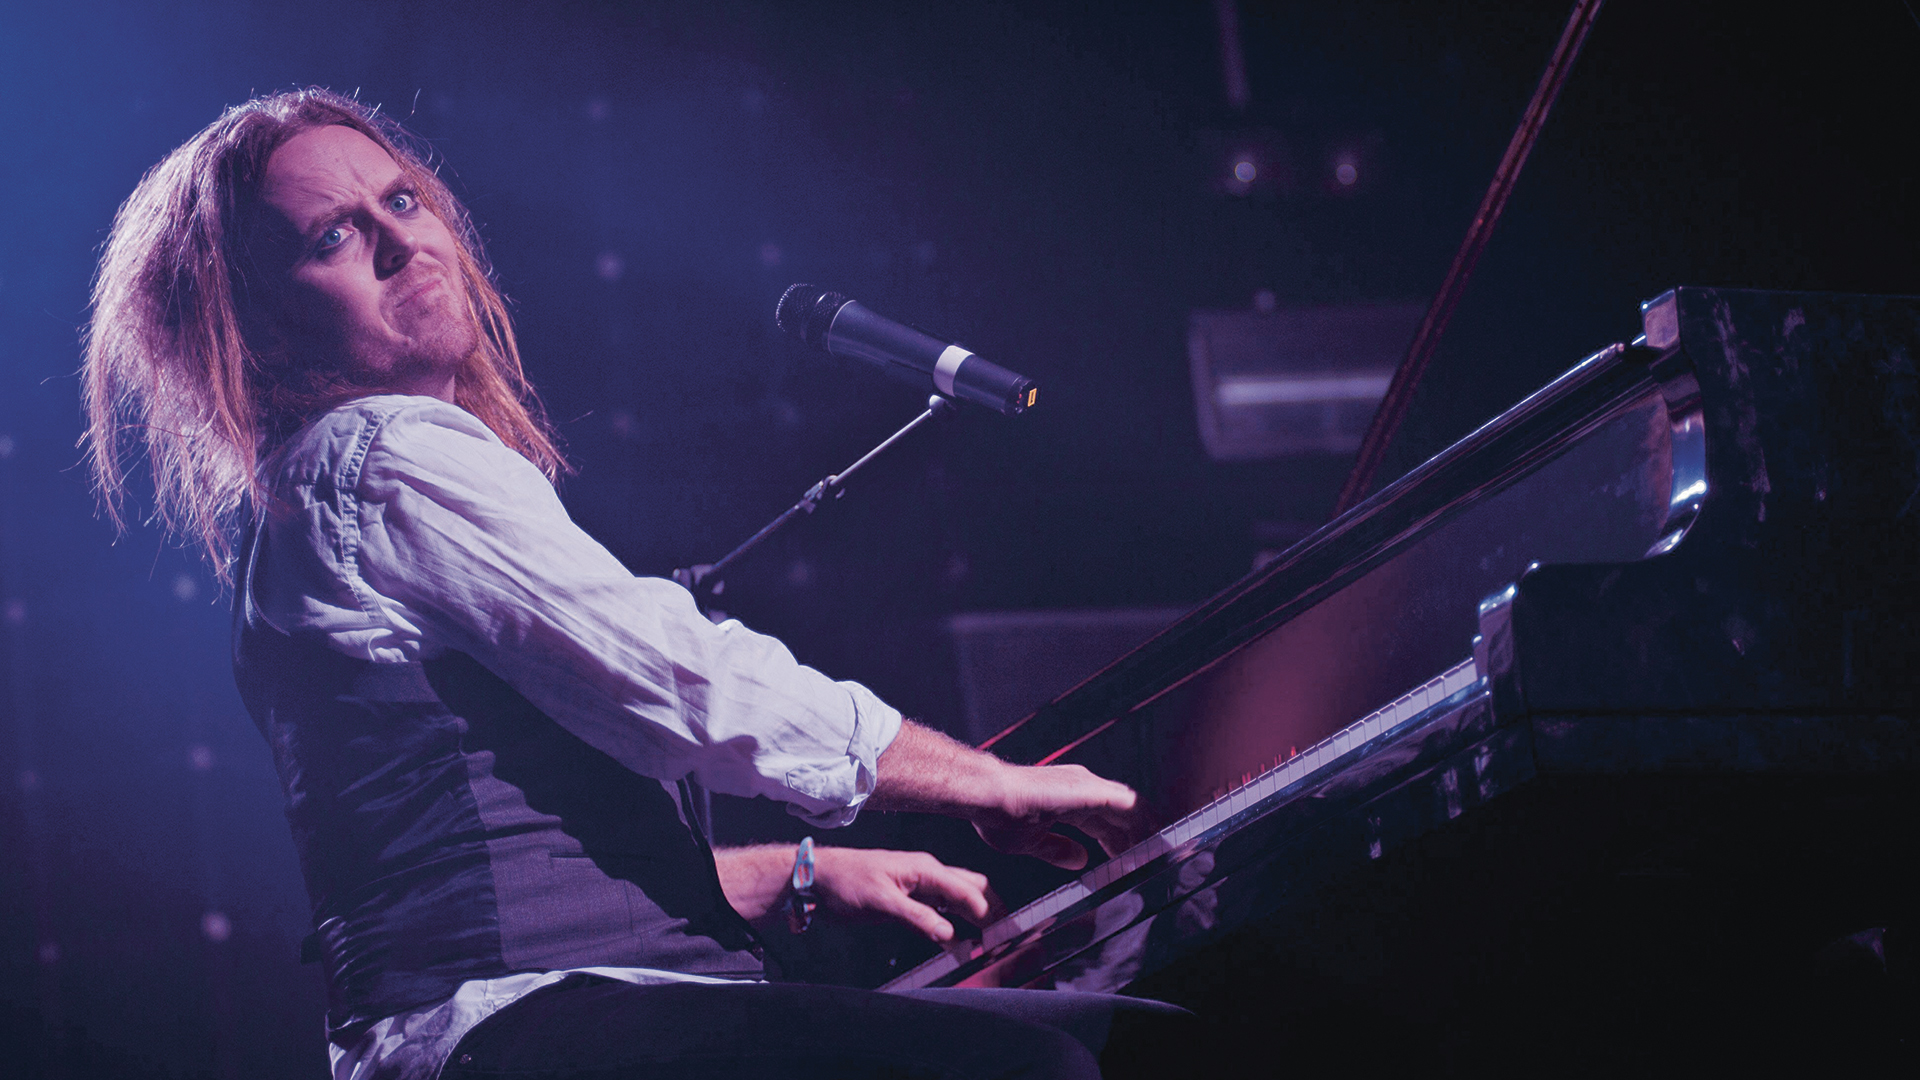 Tim Minchin performing at Camp Bestival